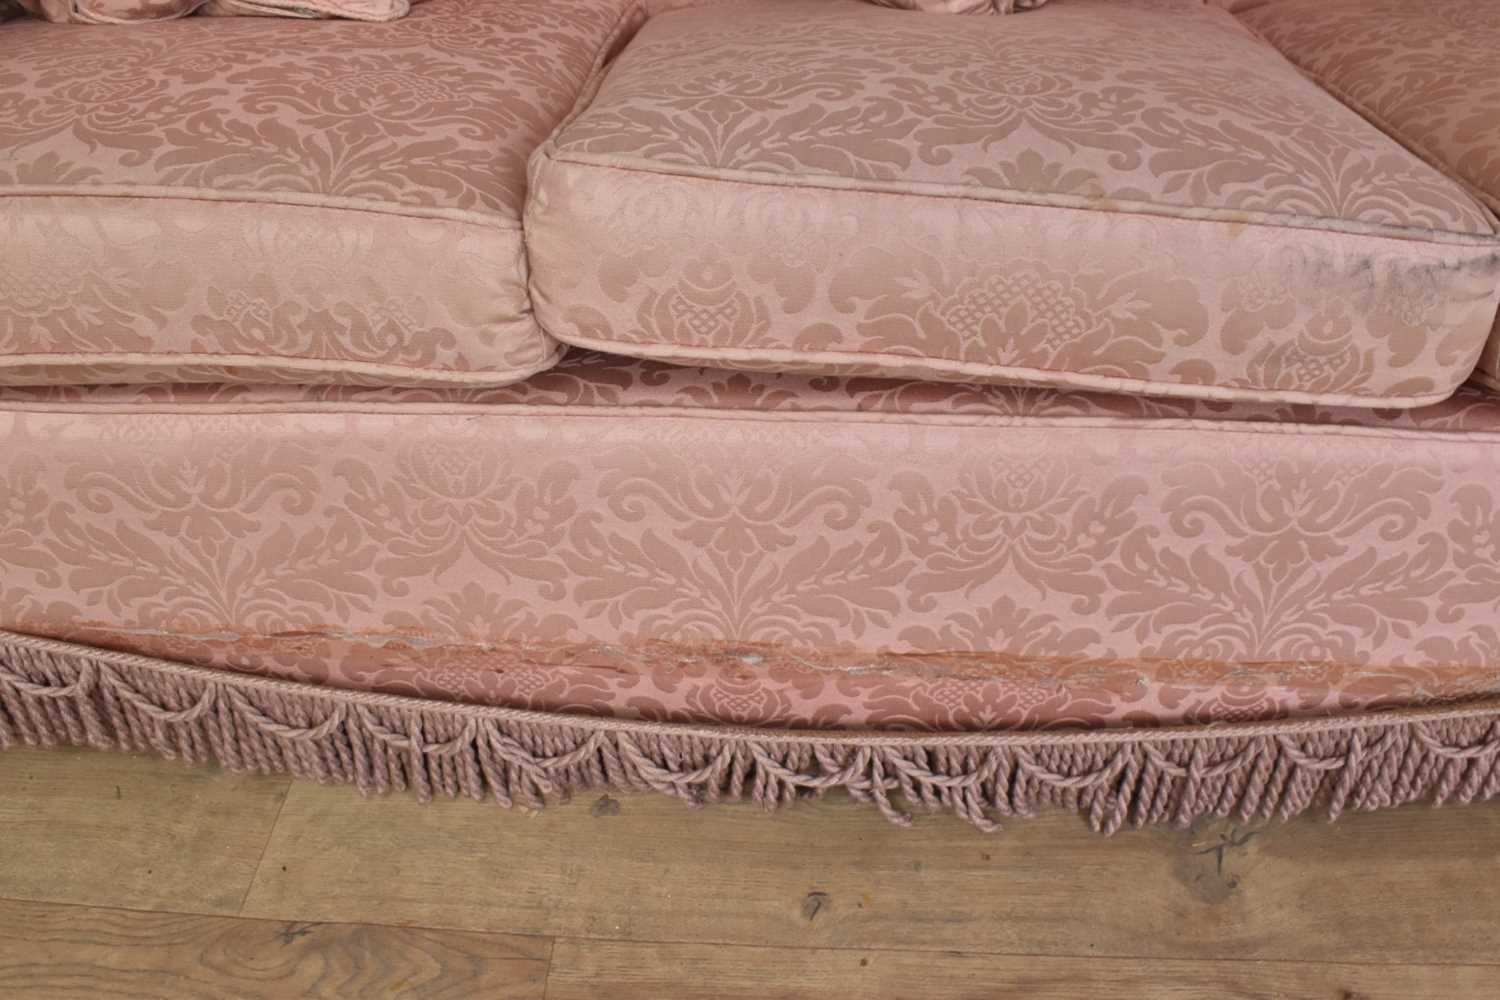 Traditional Knowle sofa - Image 4 of 9